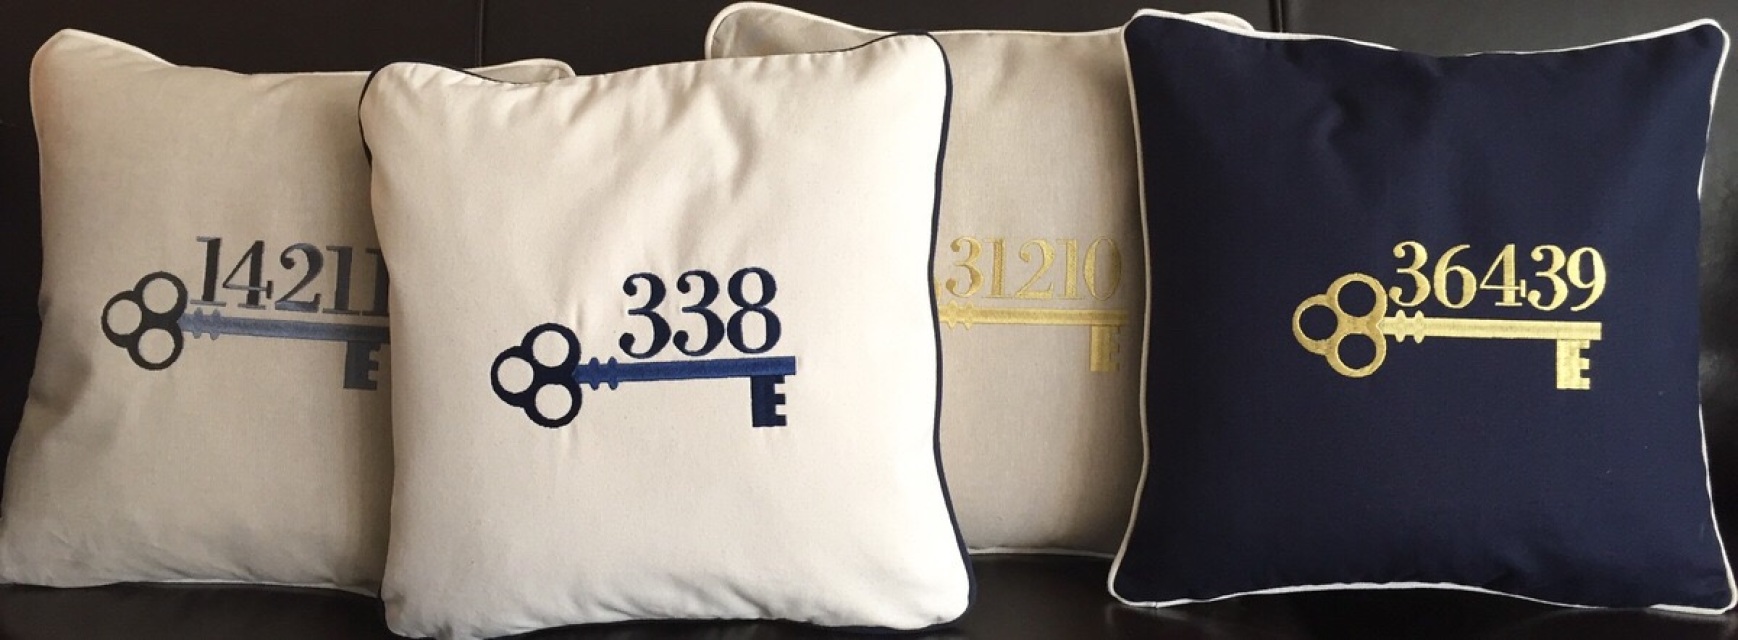 Monogram Pillow Navy Blue Cotton Canvas with Piping 16 x 16 Inches